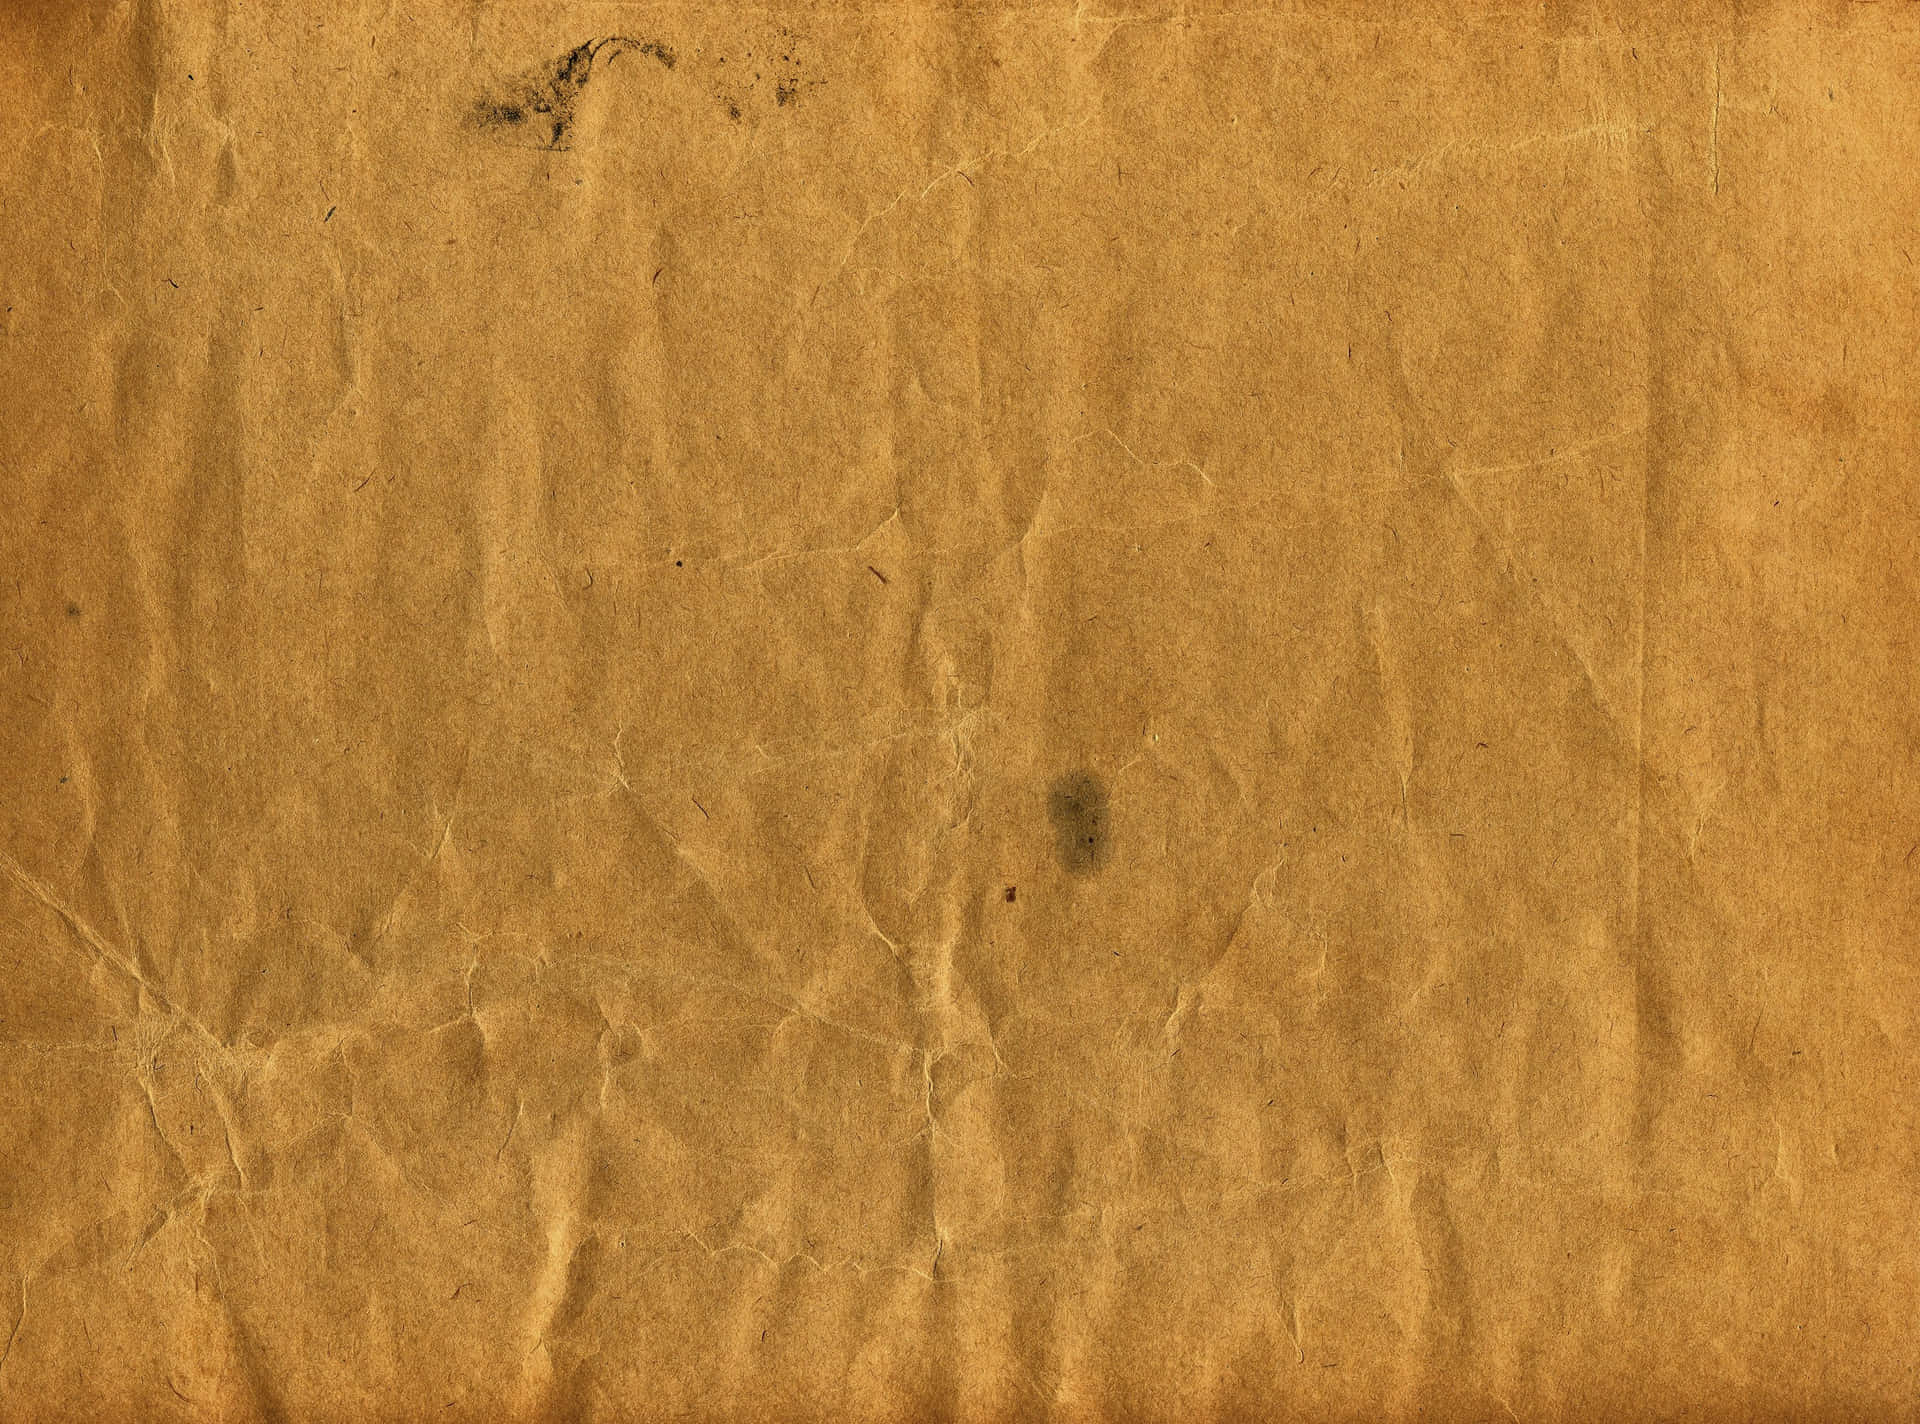 Old-fashioned brown paper texture and pattern.